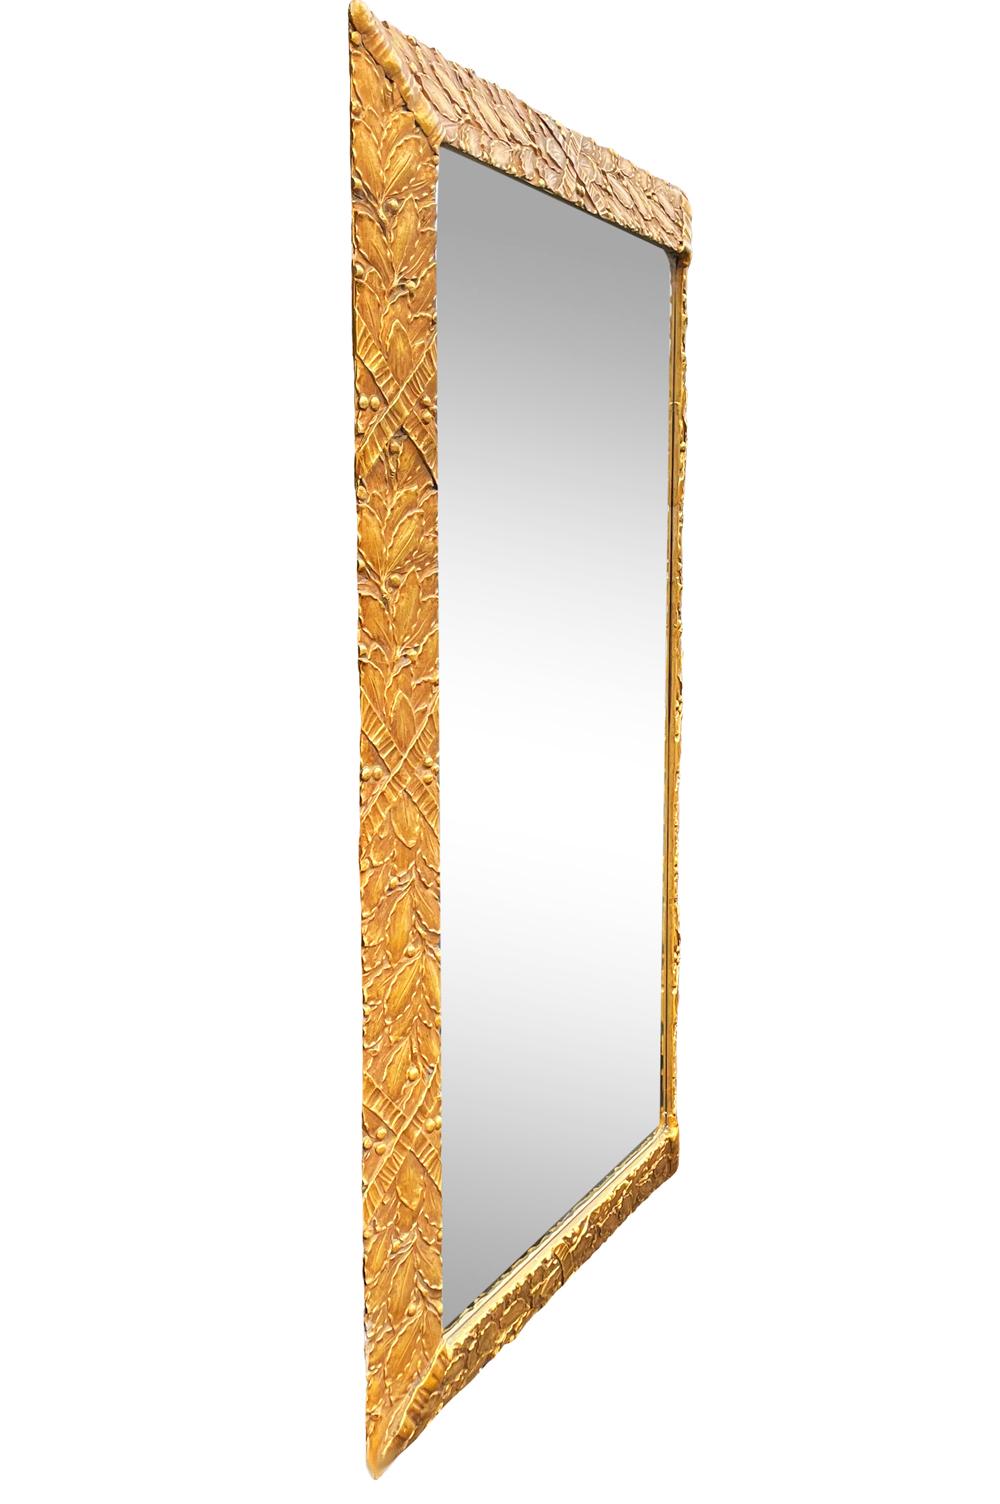 Mid-20th Century Hollywood Regency Large Italian Rectangular Mirror in Gold Gilded Carved Wood For Sale